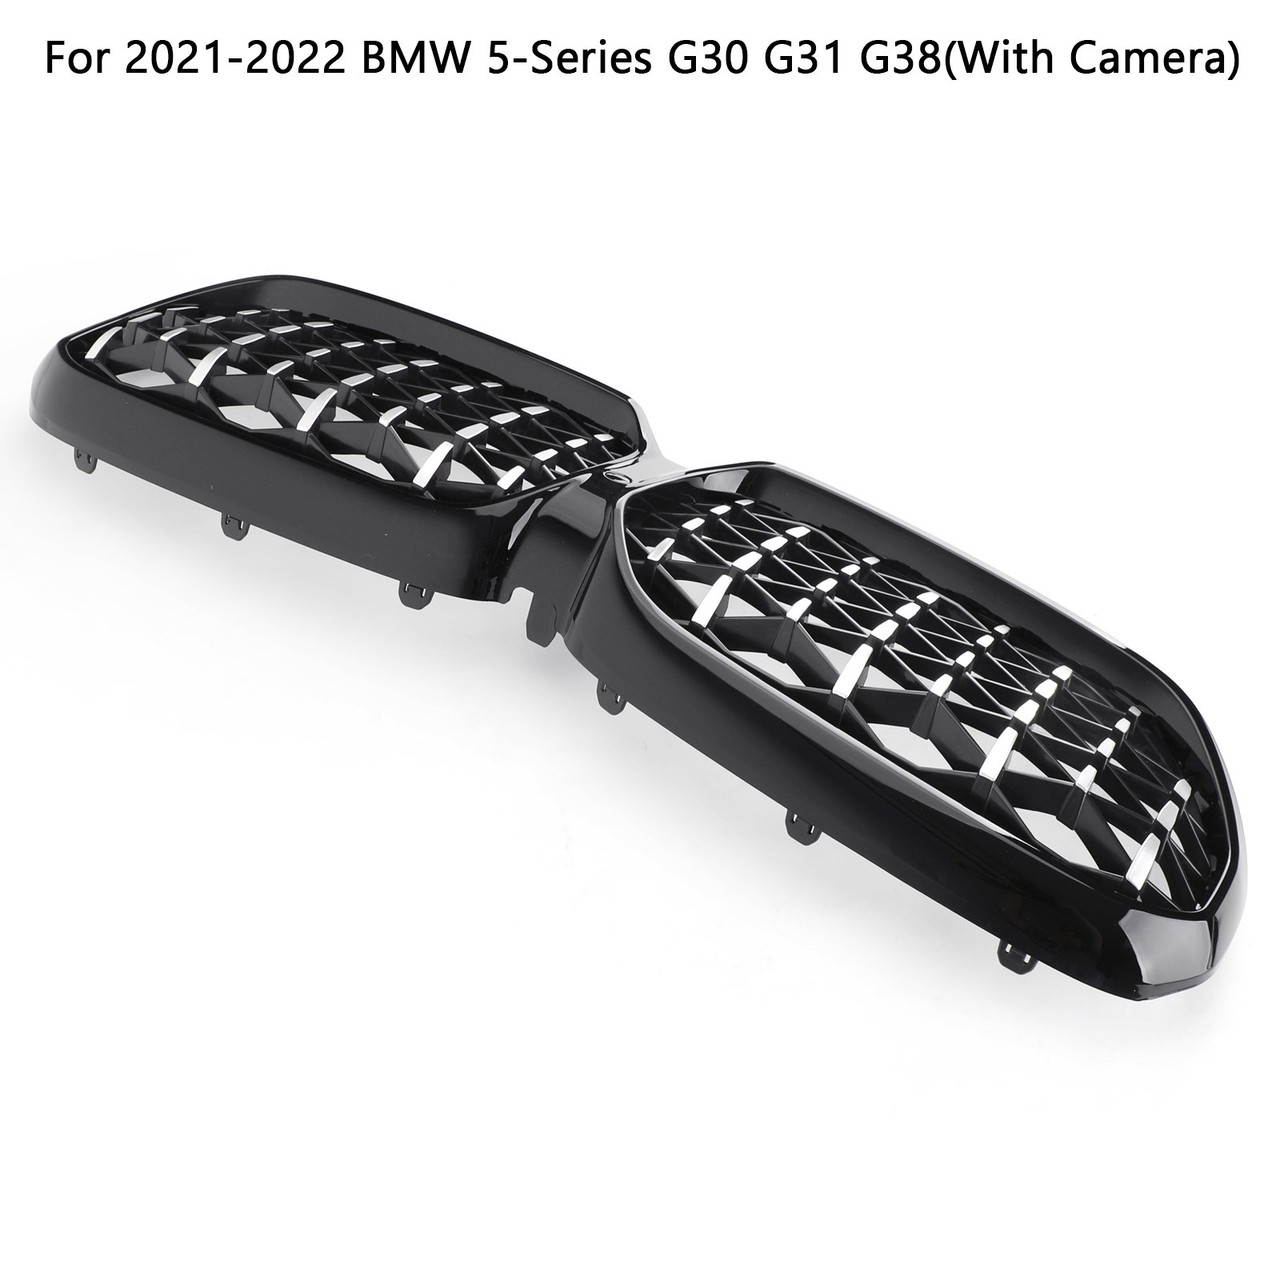 Grill Grille Fit For BMW 5-Series G38 2021-2022 Black Chrome